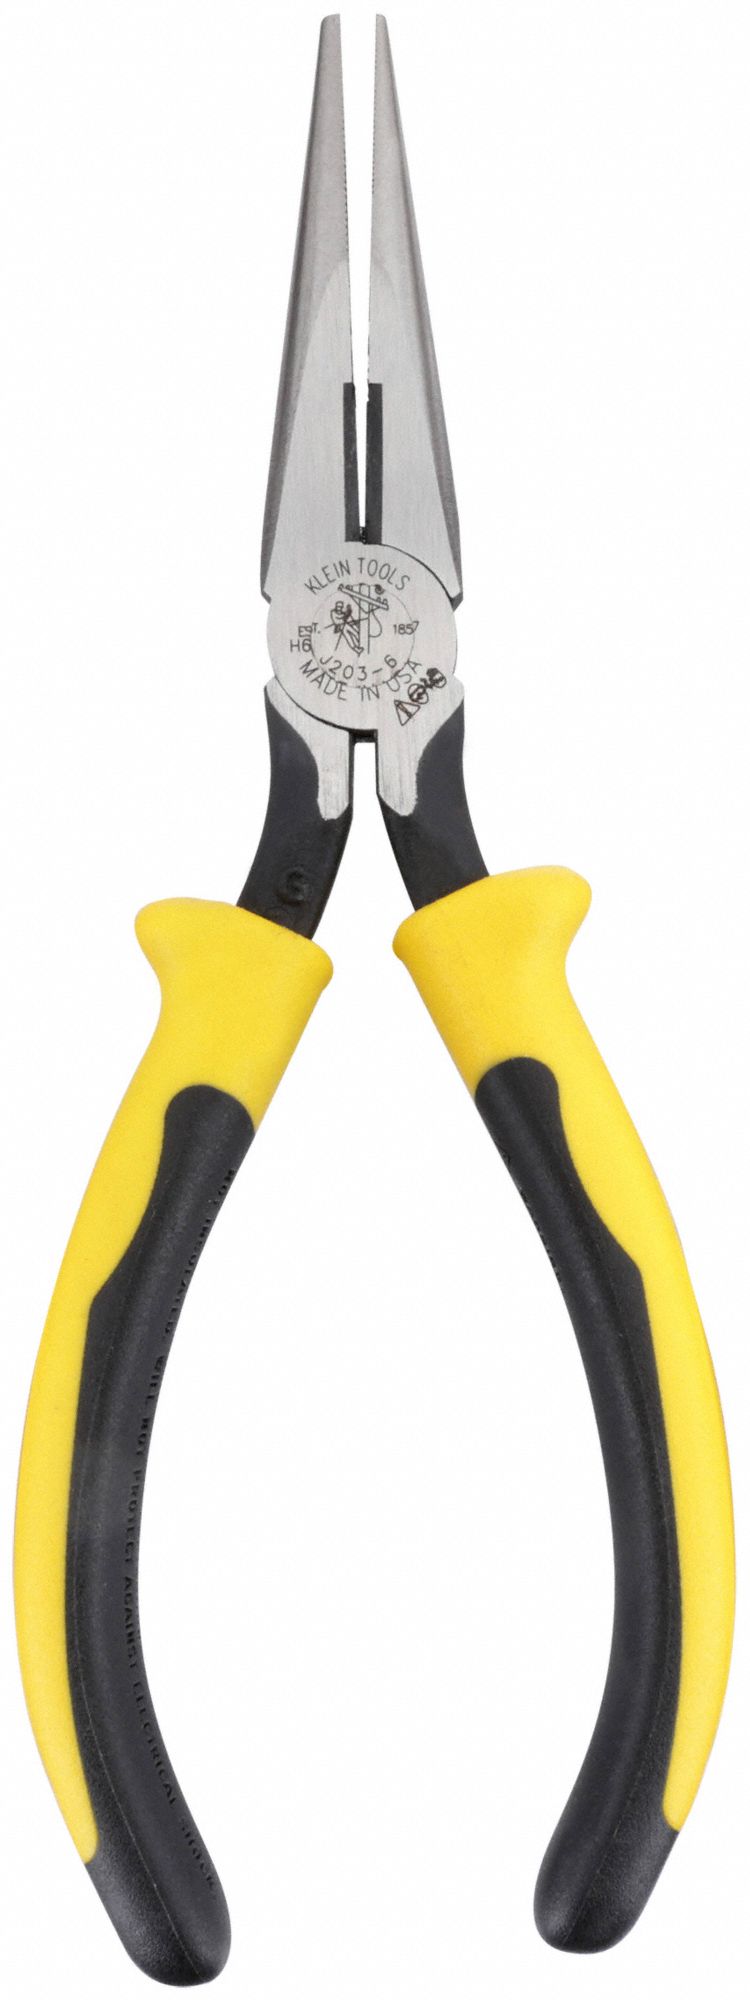 2 in Max Jaw Opening, 6 5/8 in Overall Lg, Needle Nose Plier - 2DFB6